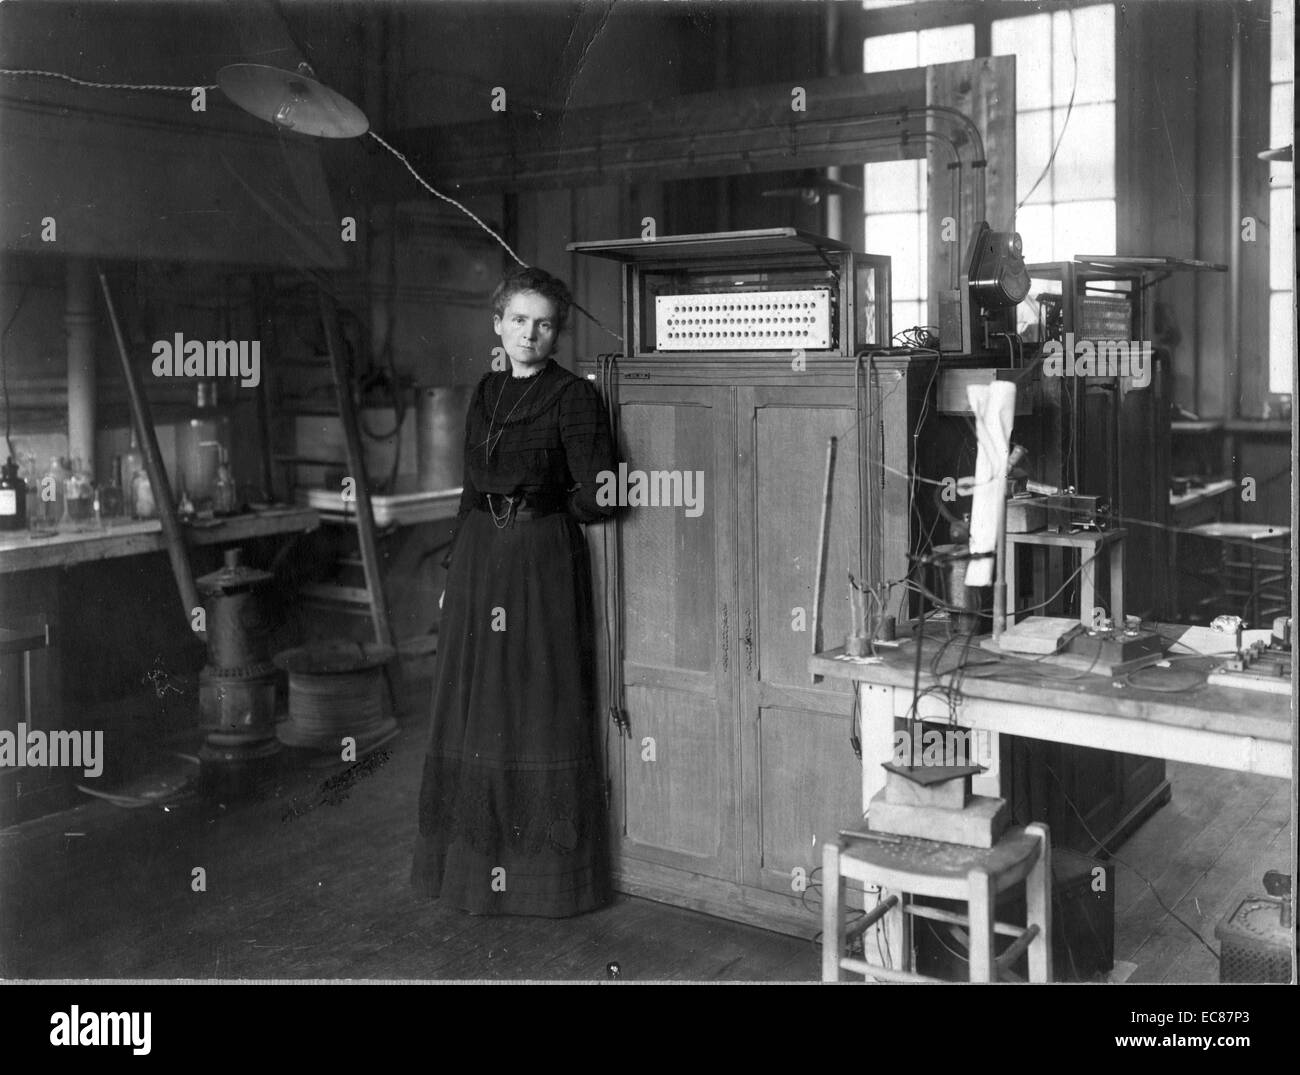 Photograph of Marie Sklodowska-Curie (1867-1934) Polish and naturalised-French physicist and chemist who conducted pioneering research on radioactivity. She was the first woman to win a Nobel Prize. Dated 1930 Stock Photo